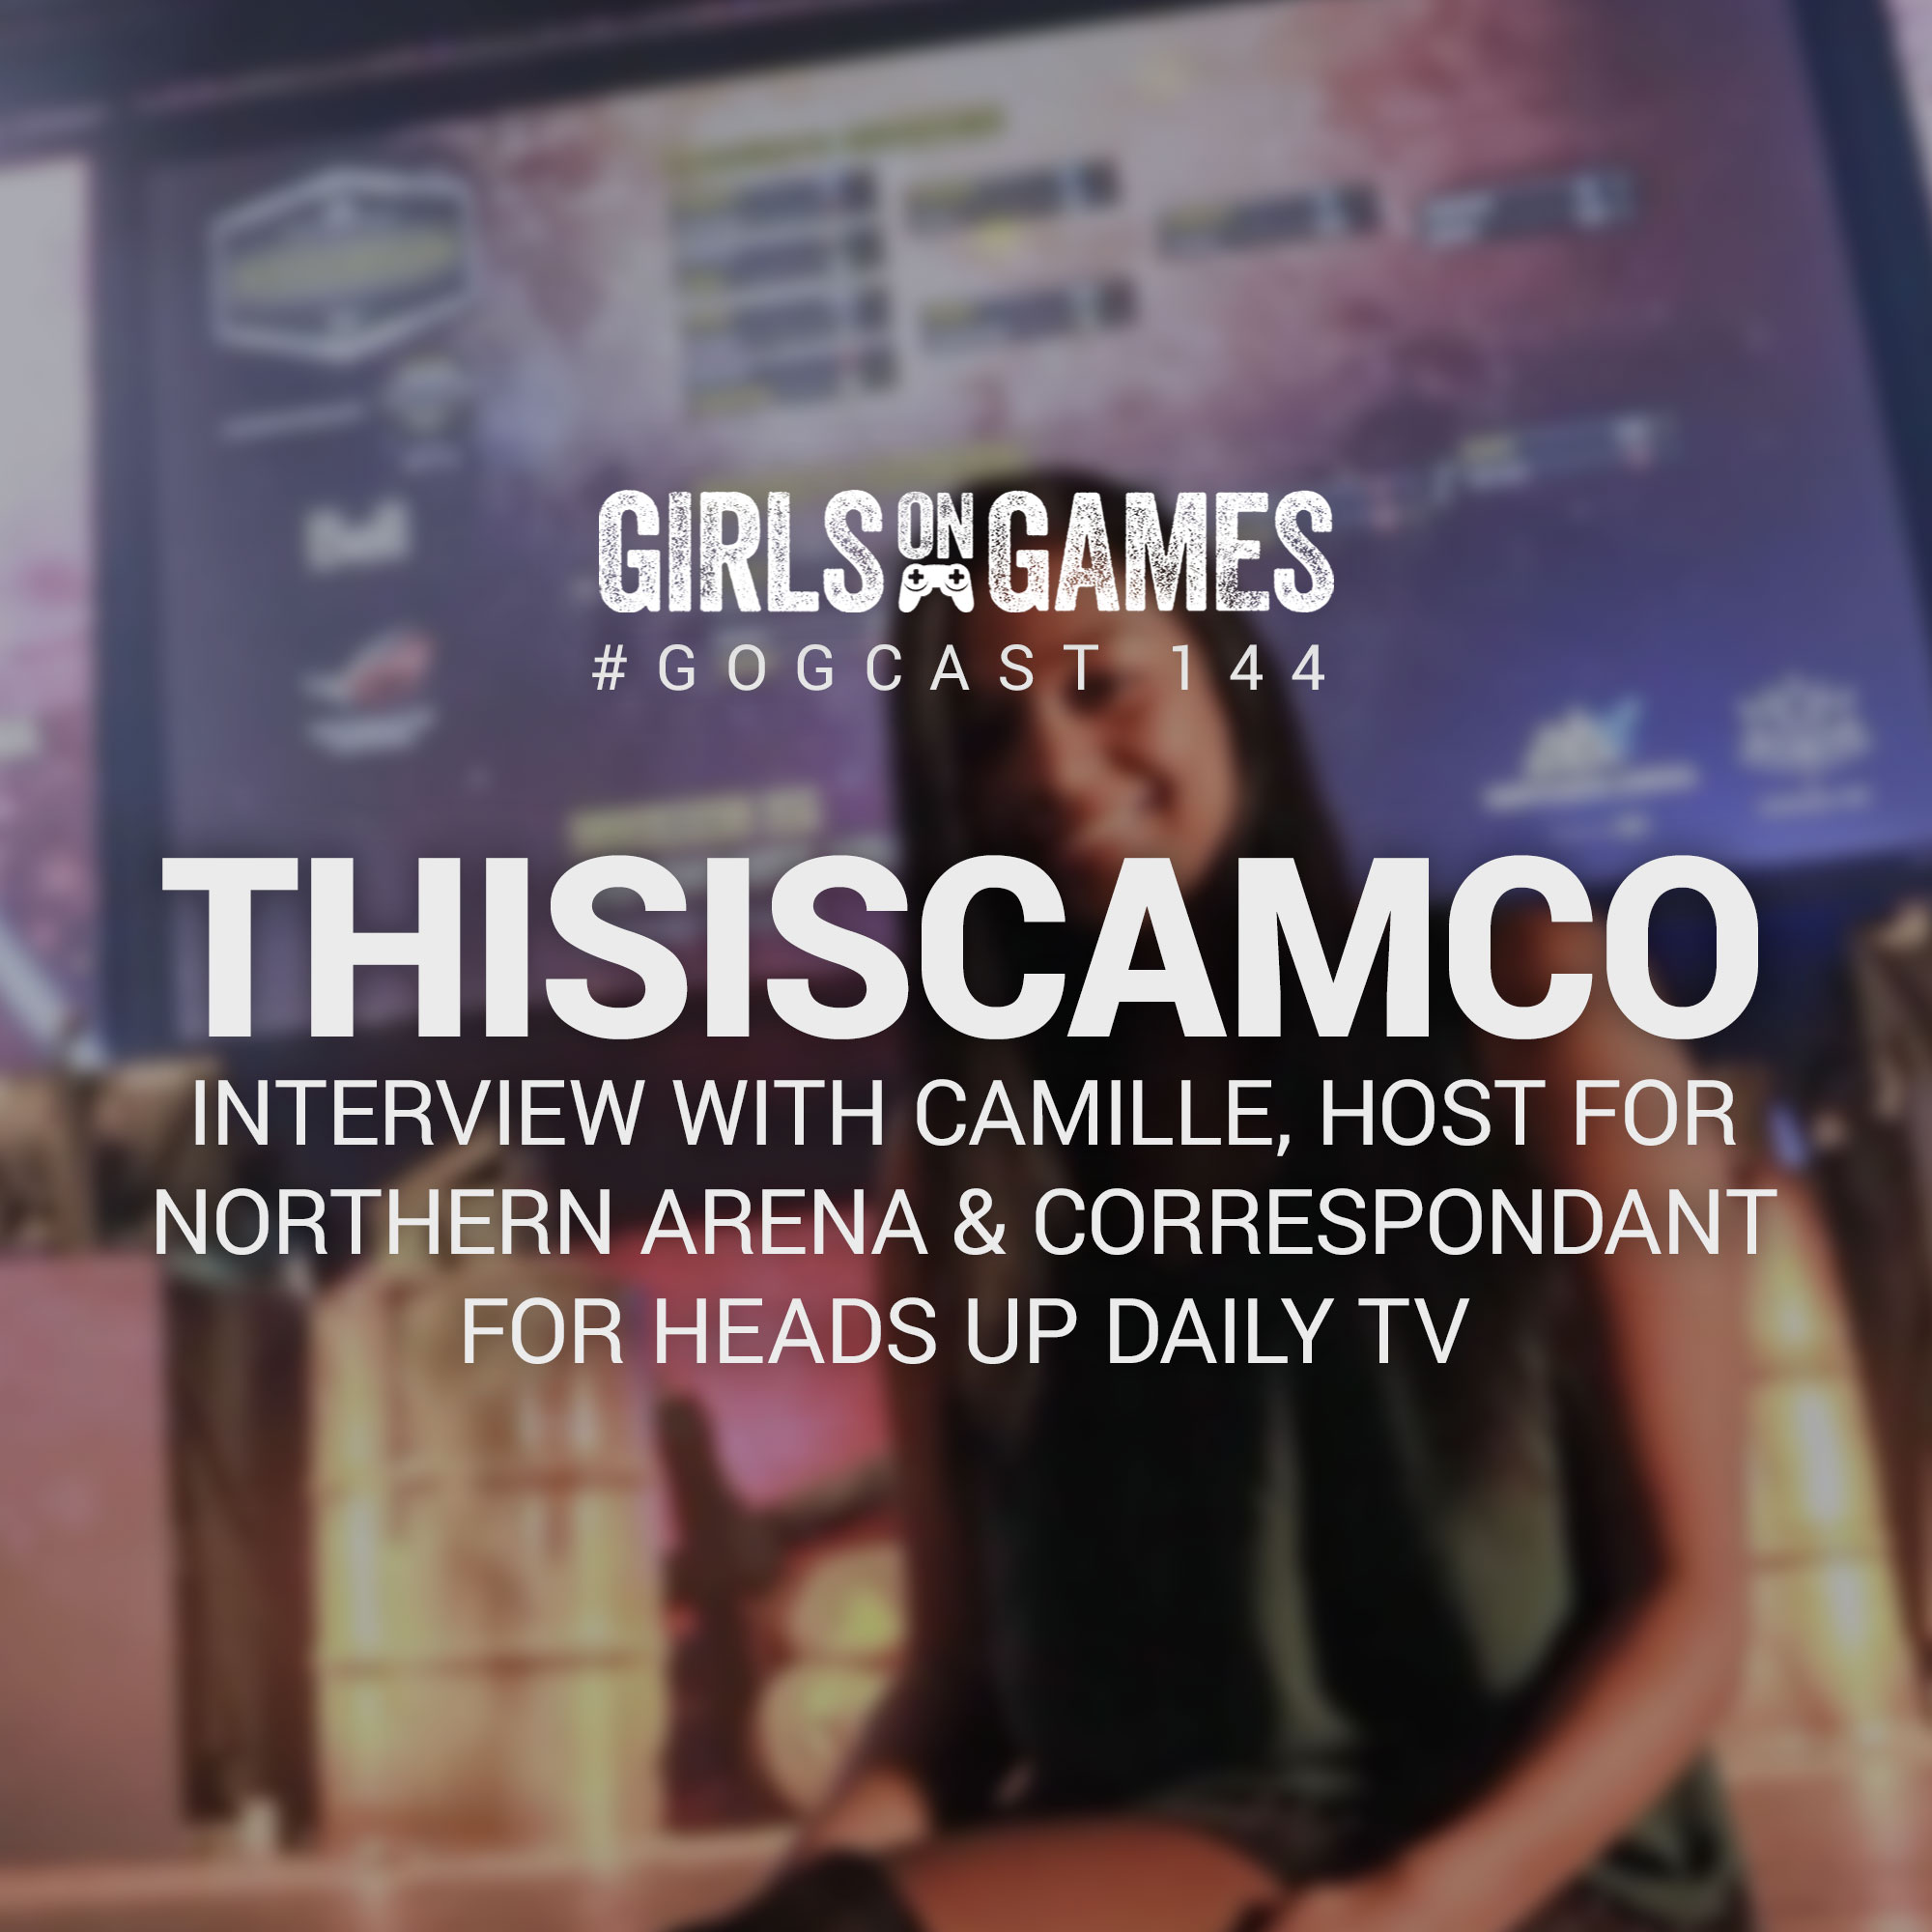 GoGCast 144: Interview with Camille aka thisiscamco